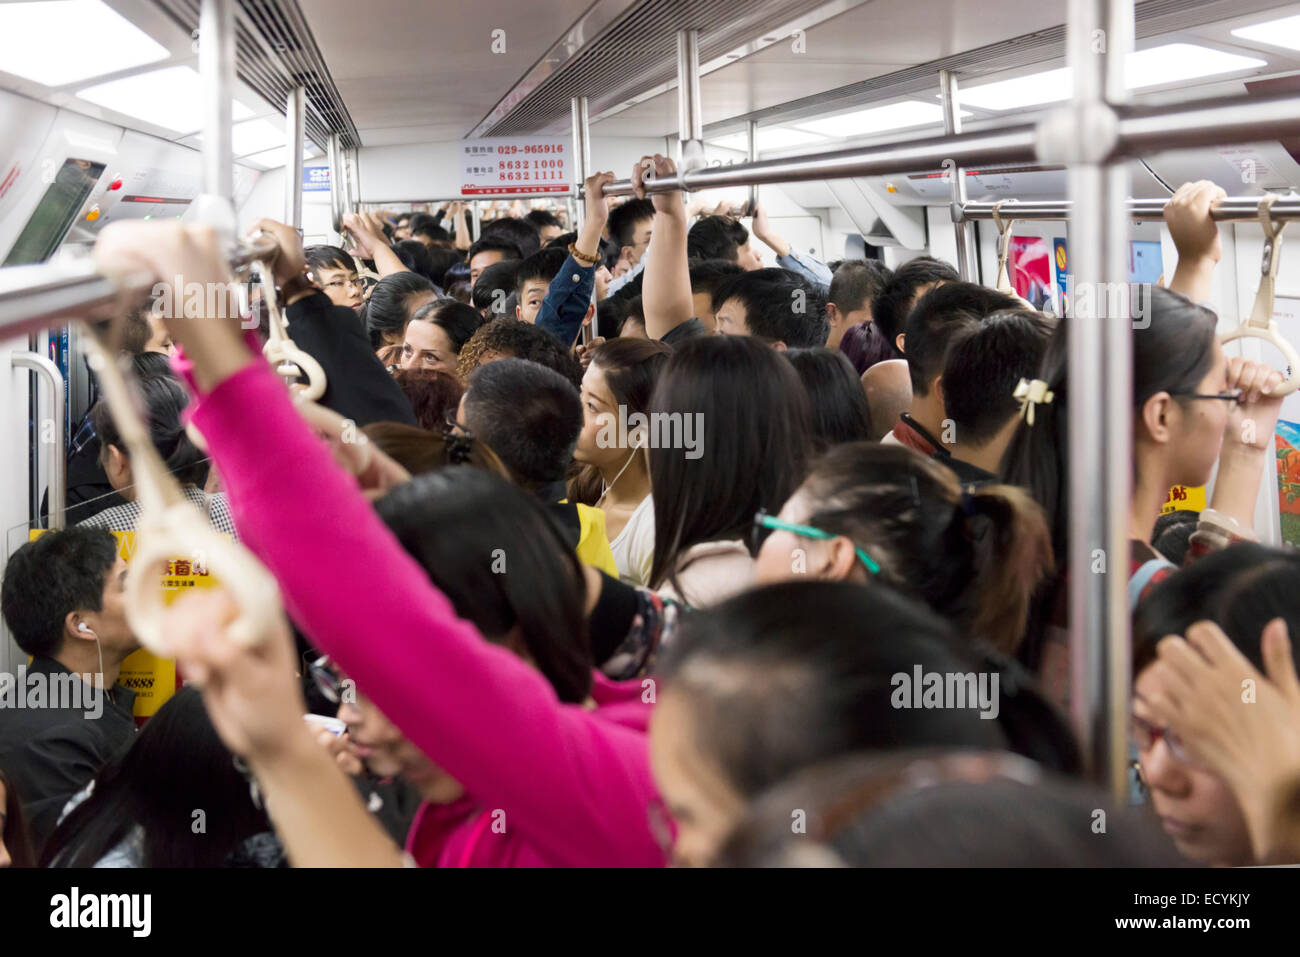 People riding a crowded subway train in Xi'an, China Stock Photo